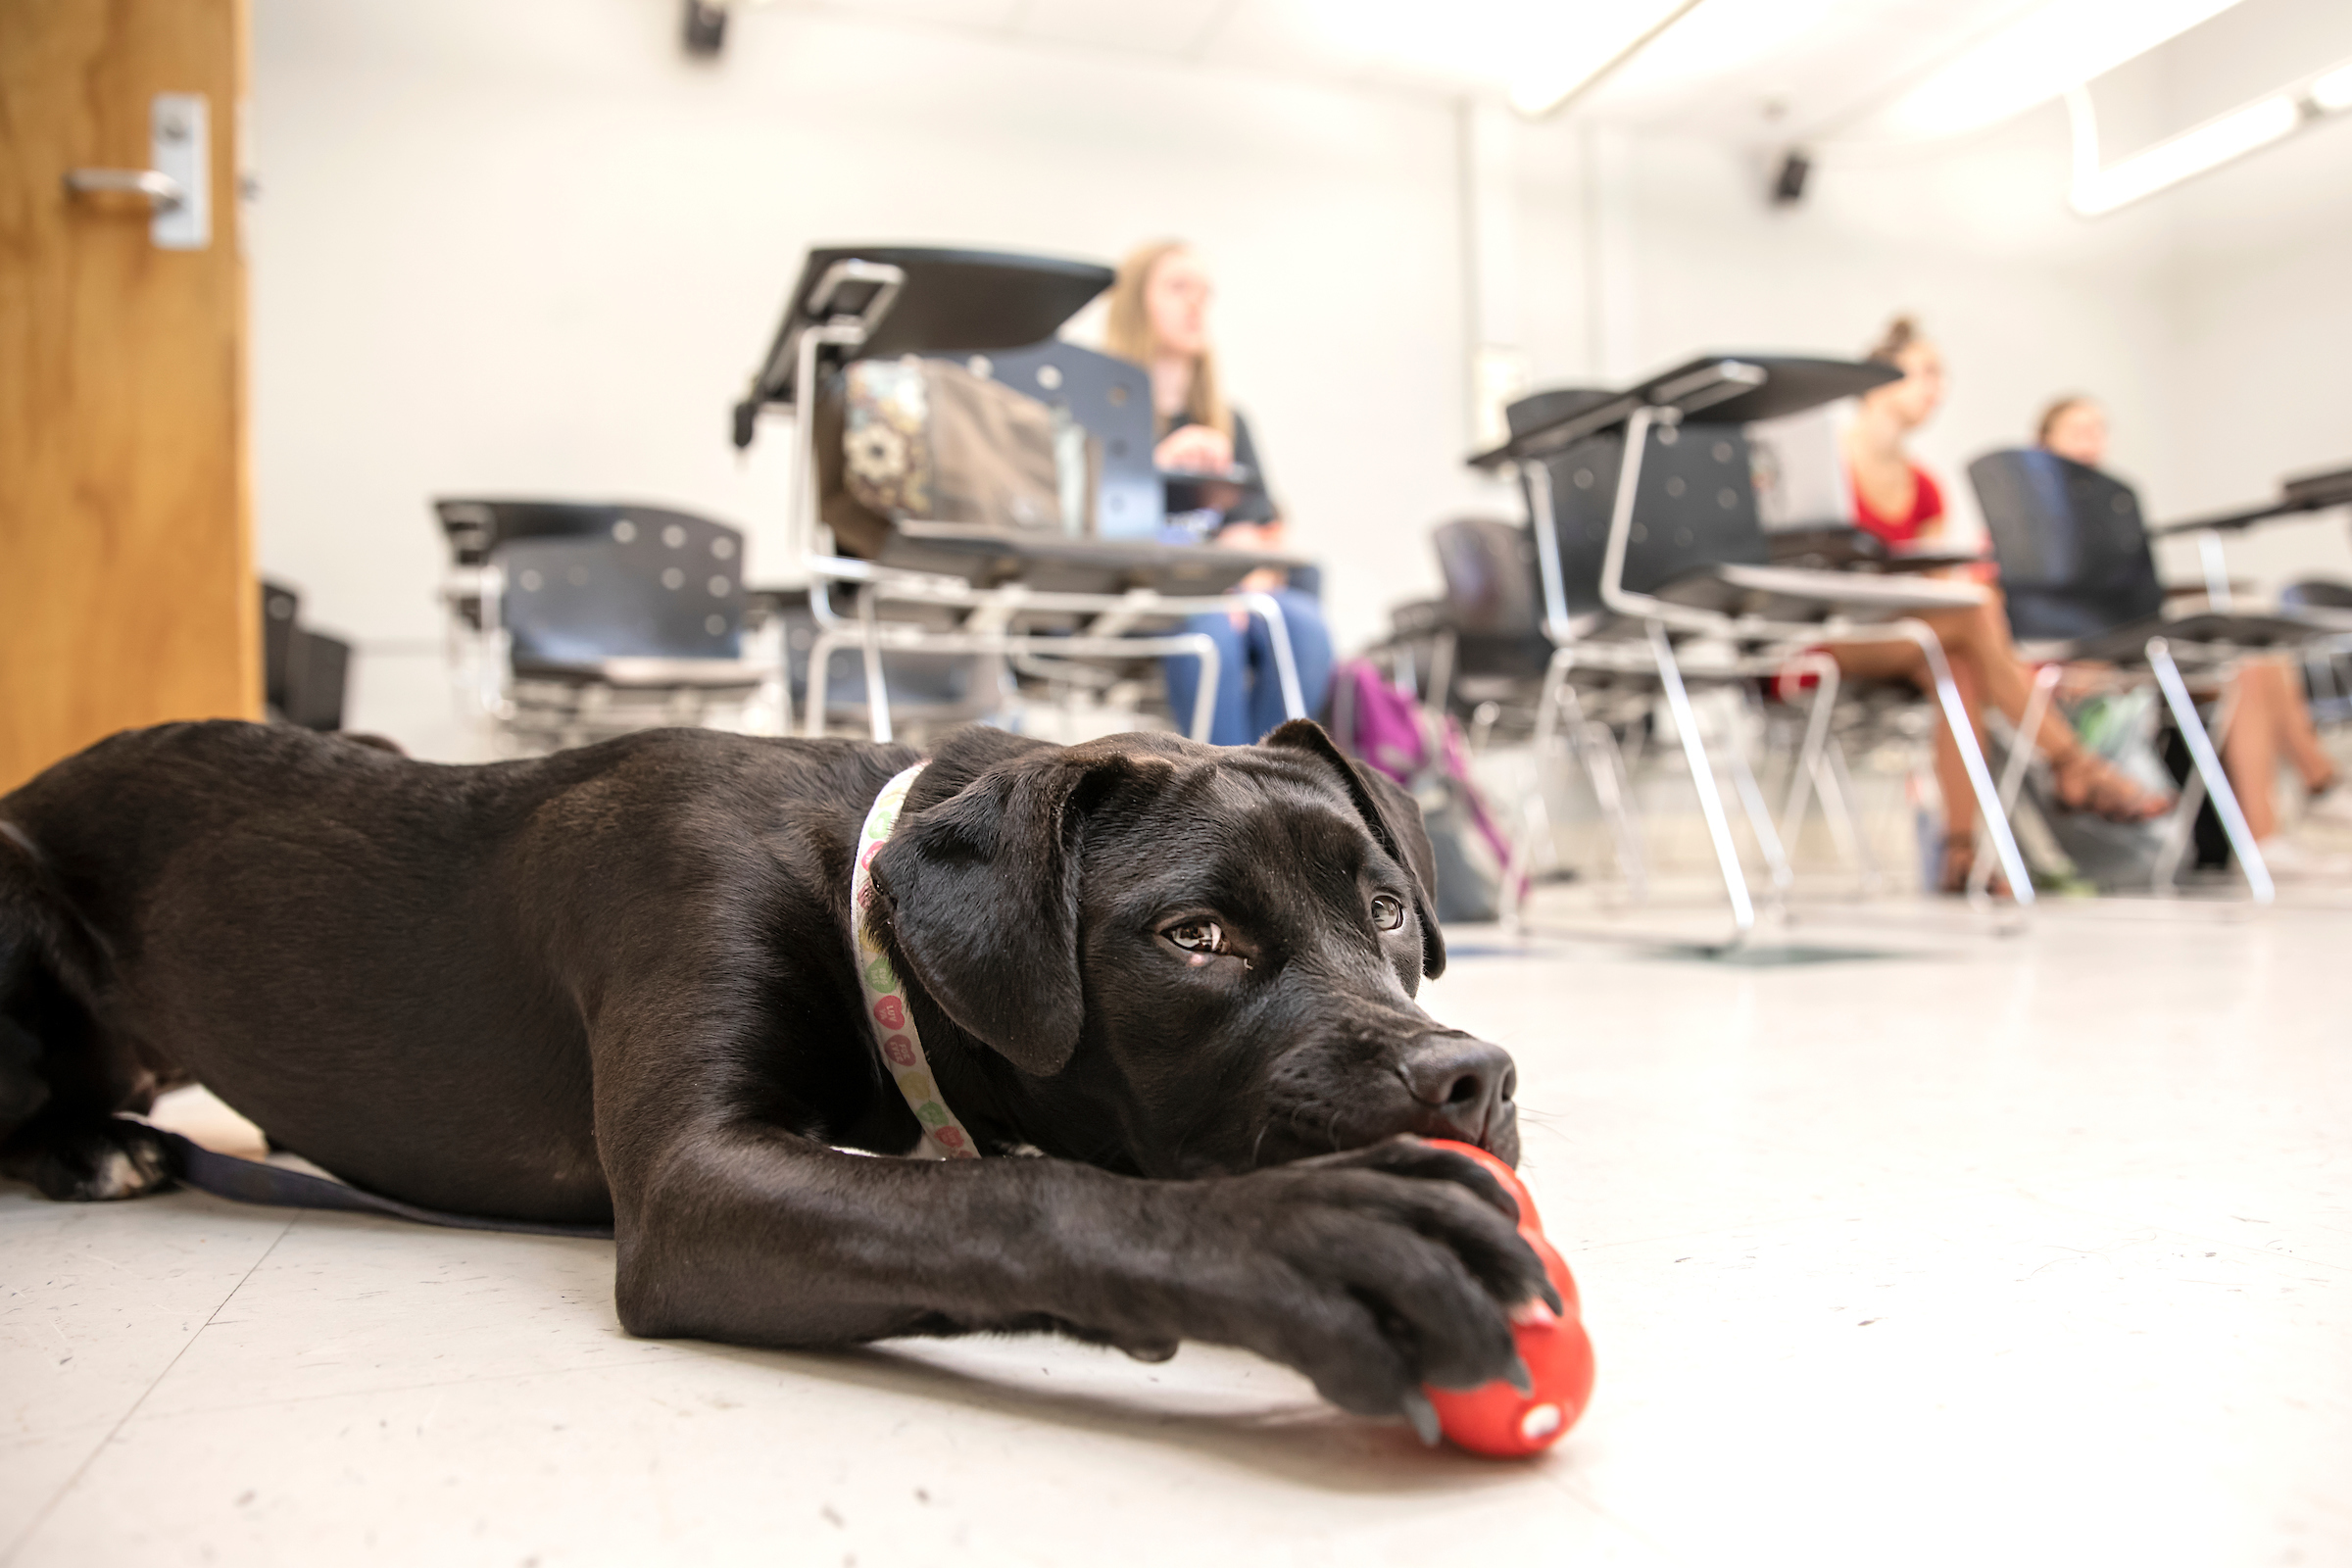 Posey, a support dog with UNC PAWS, gnaws on a chew toy during a visit to the Canine Cultures class. (photo by Johnny Andrews)